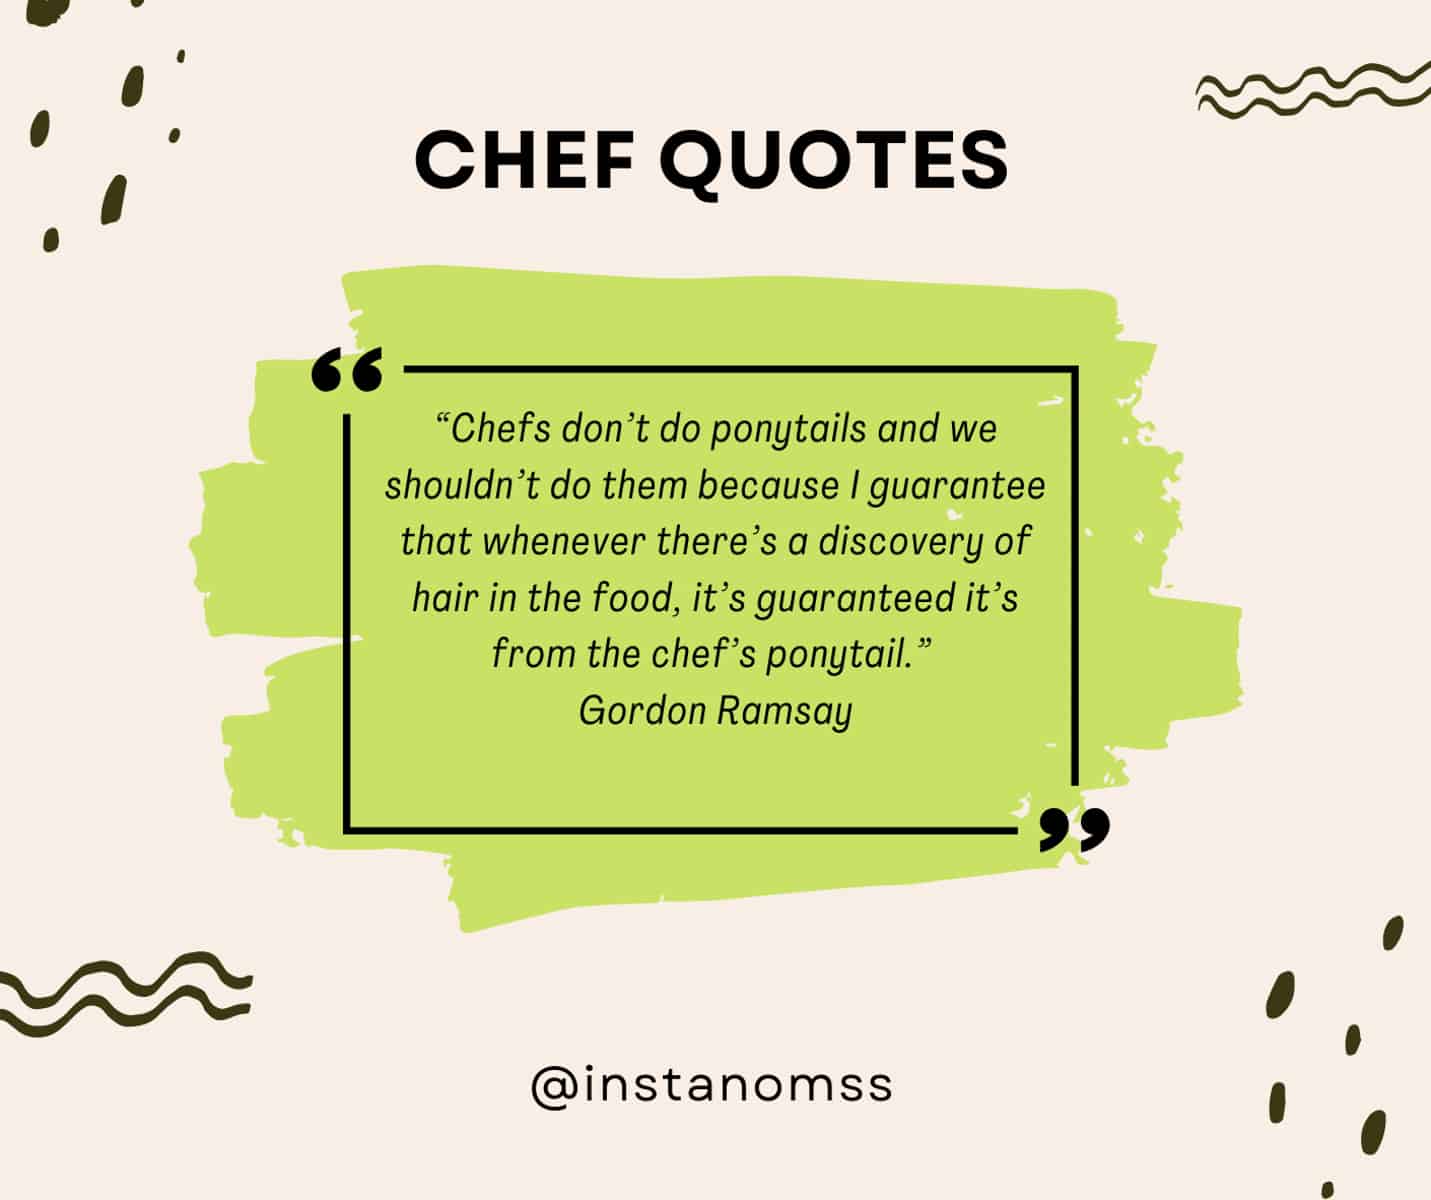 “Chefs don’t do ponytails and we shouldn’t do them because I guarantee that whenever there’s a discovery of hair in the food, it’s guaranteed it’s from the chef’s ponytail.” Gordon Ramsay